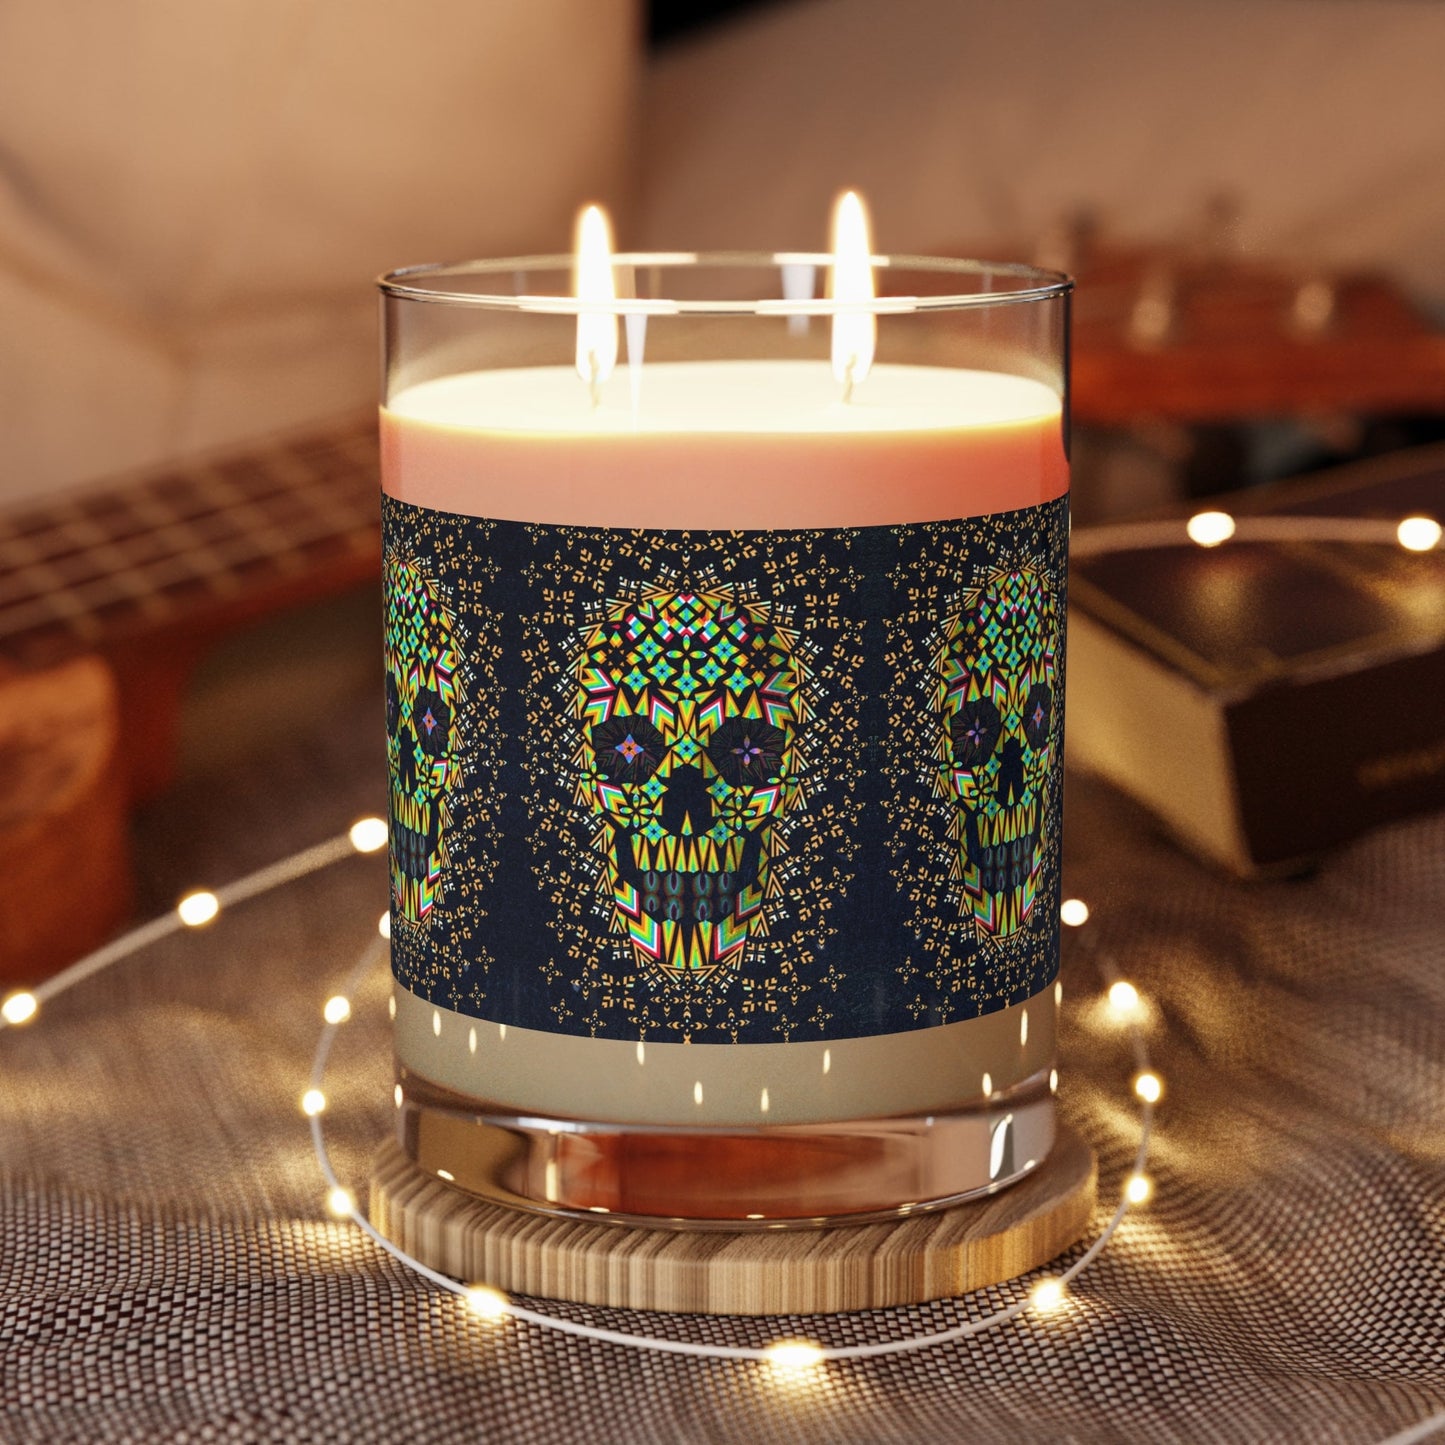 Sugar Skull Candle - Full Glass, 11oz Scented Candle Gift, Lavender Scented Candle Home Decor